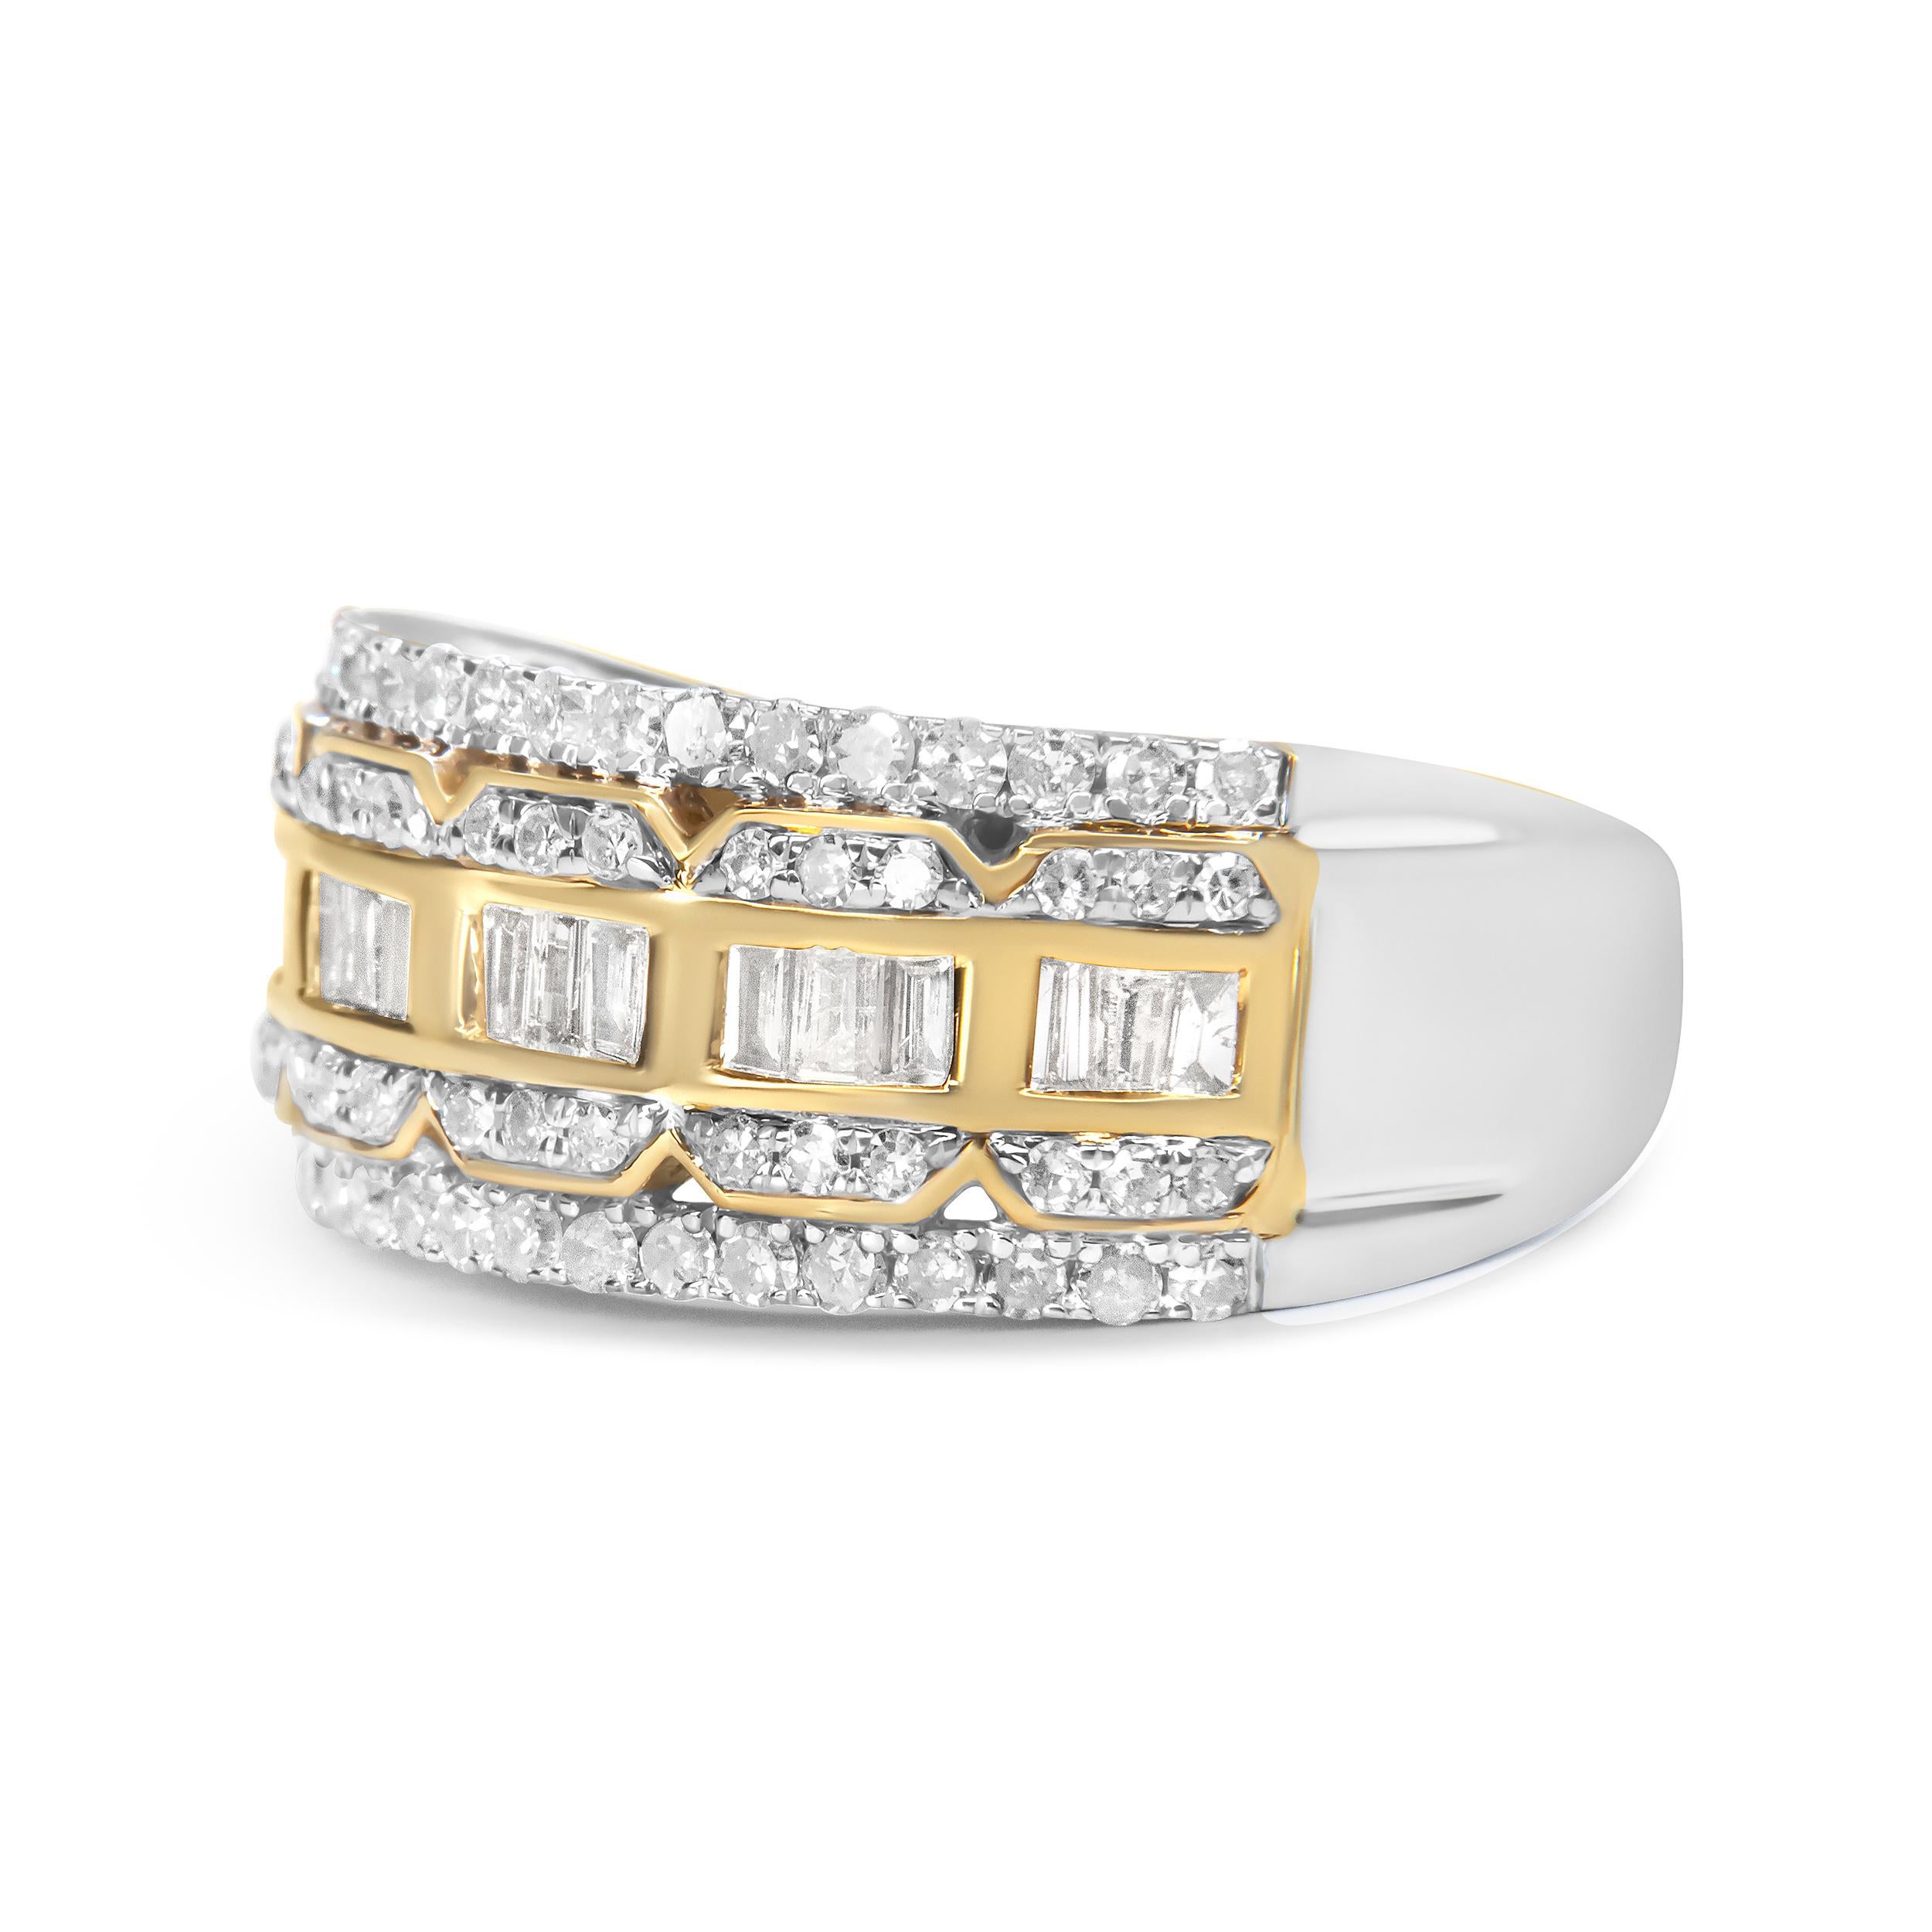 For Sale:  10K White and Yellow Gold 1.0 Carat Diamond Art Deco Multi-Row Ring Band 4